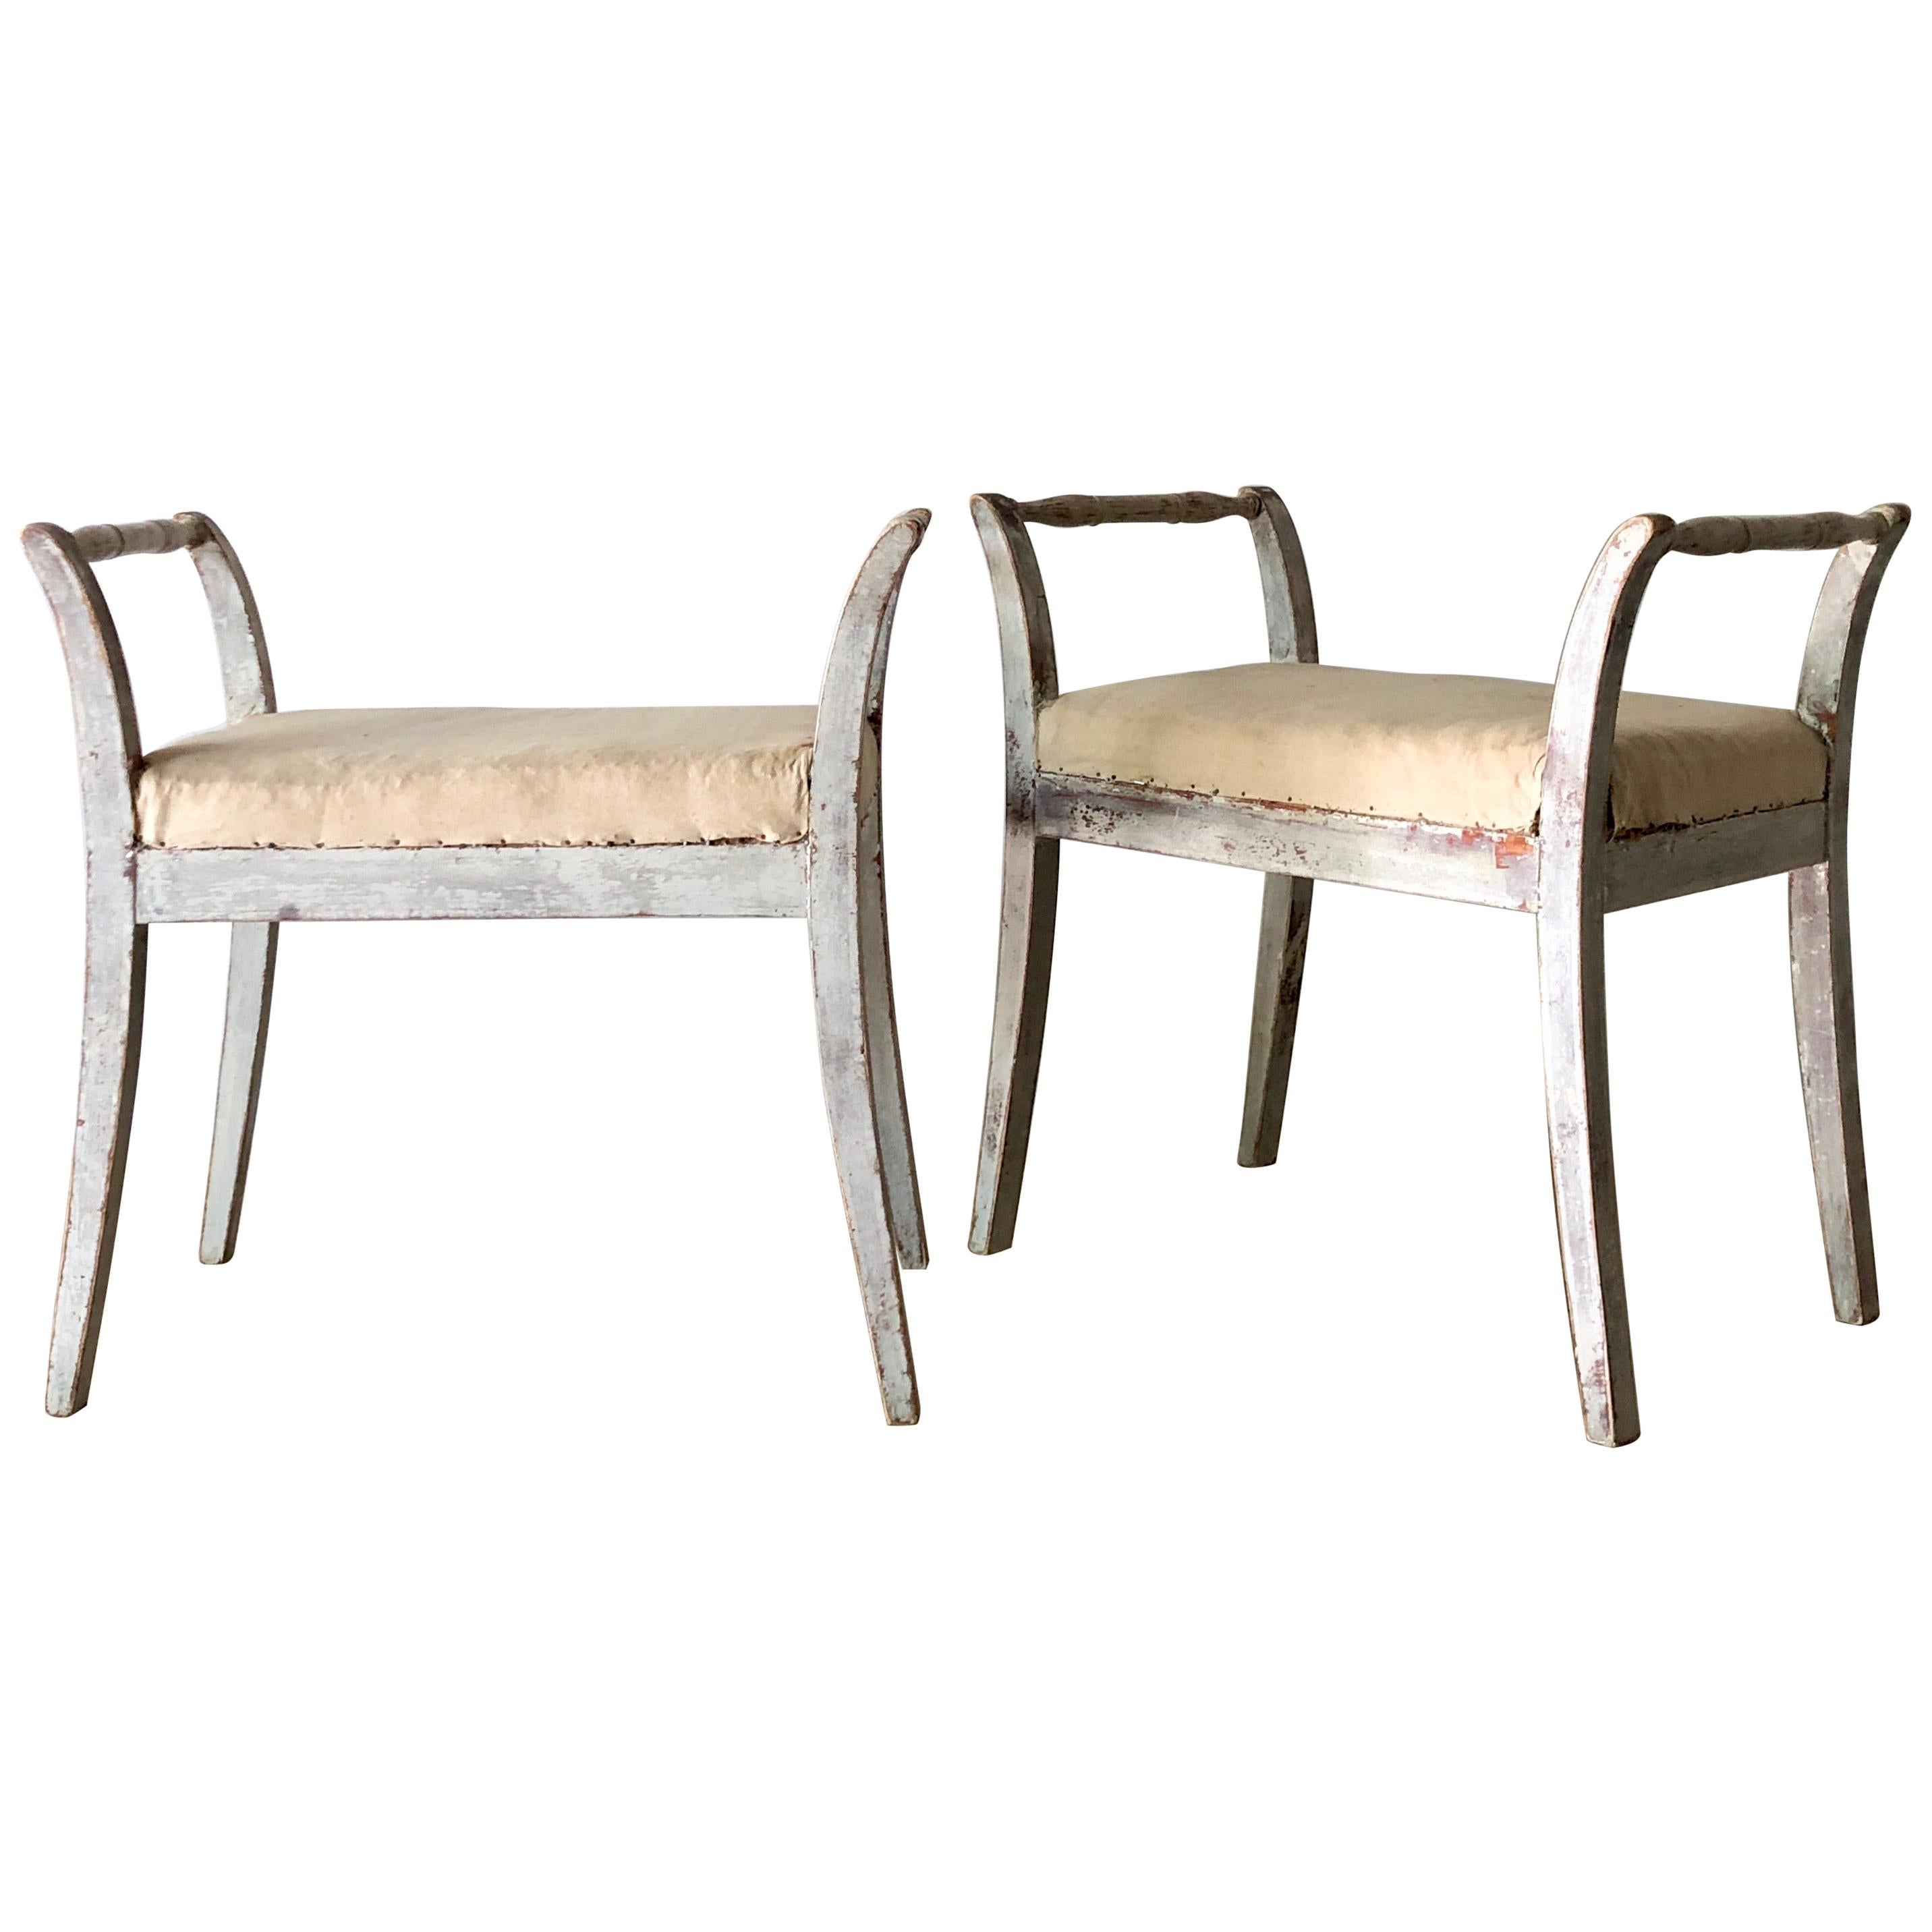 Pair of Swedish Stools with Armrests